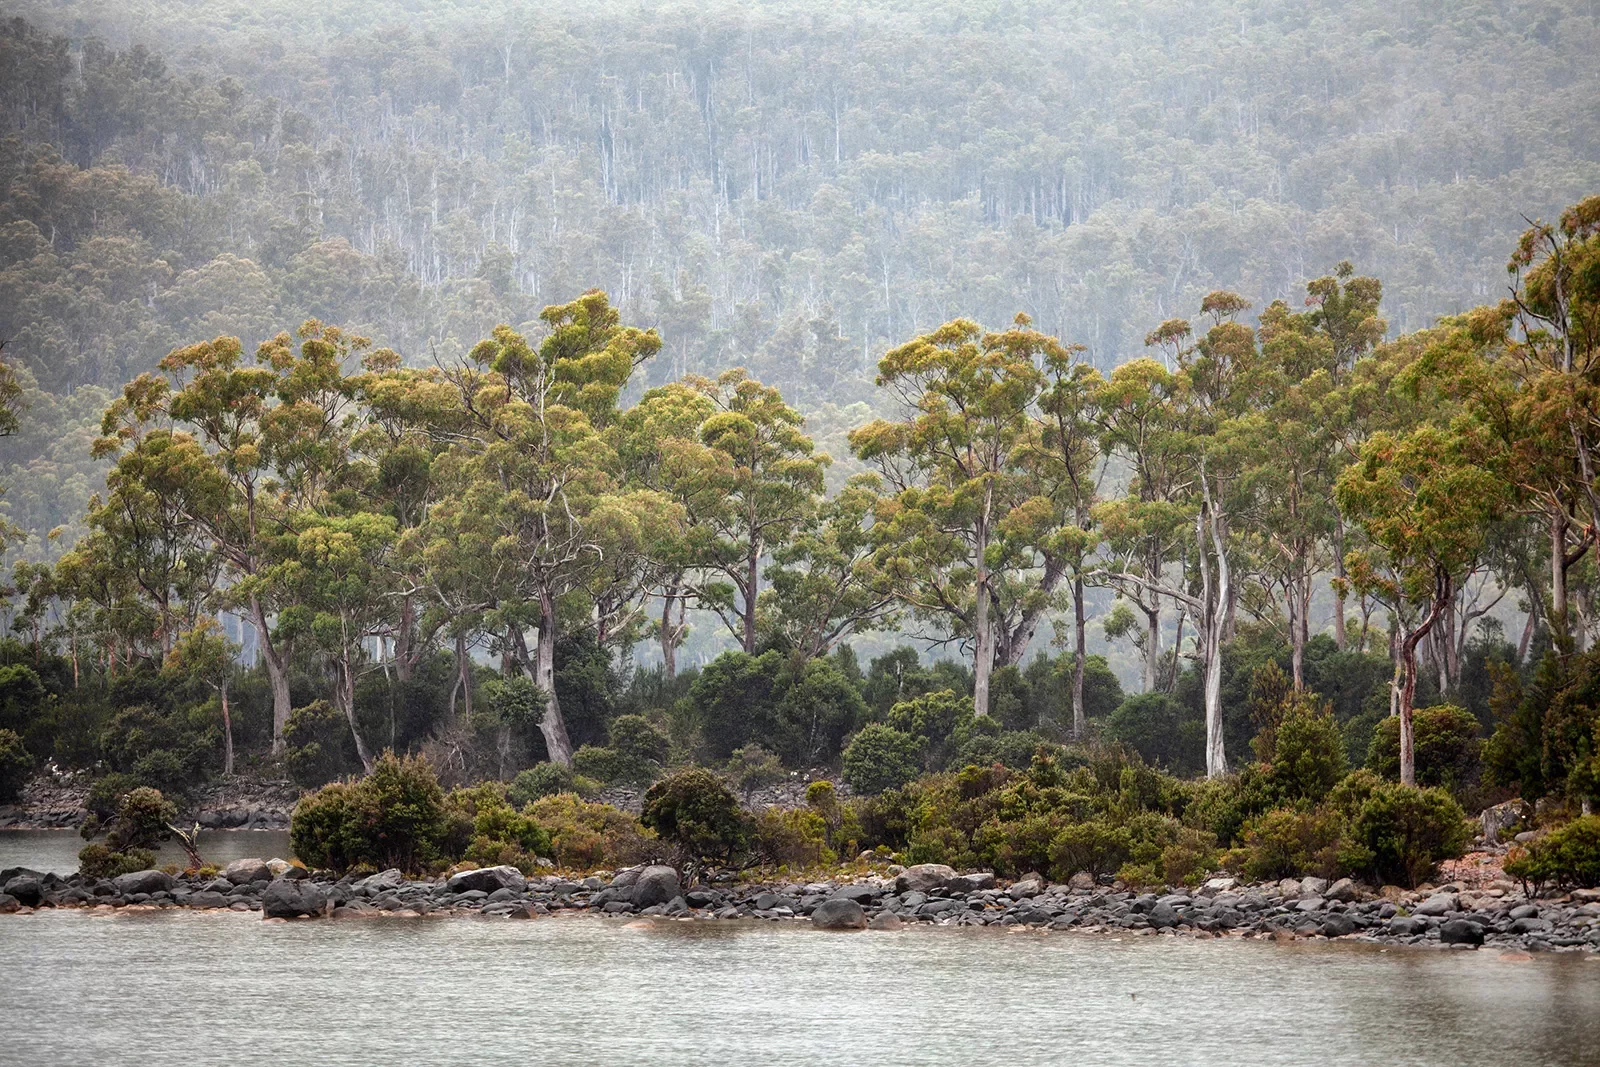 Views of Lake St Clair and native forest along the banks, seen in rain and fog. Lake St Clair is a natural freshwater lake located in the Central Highlands area of Tasmania, Australia.